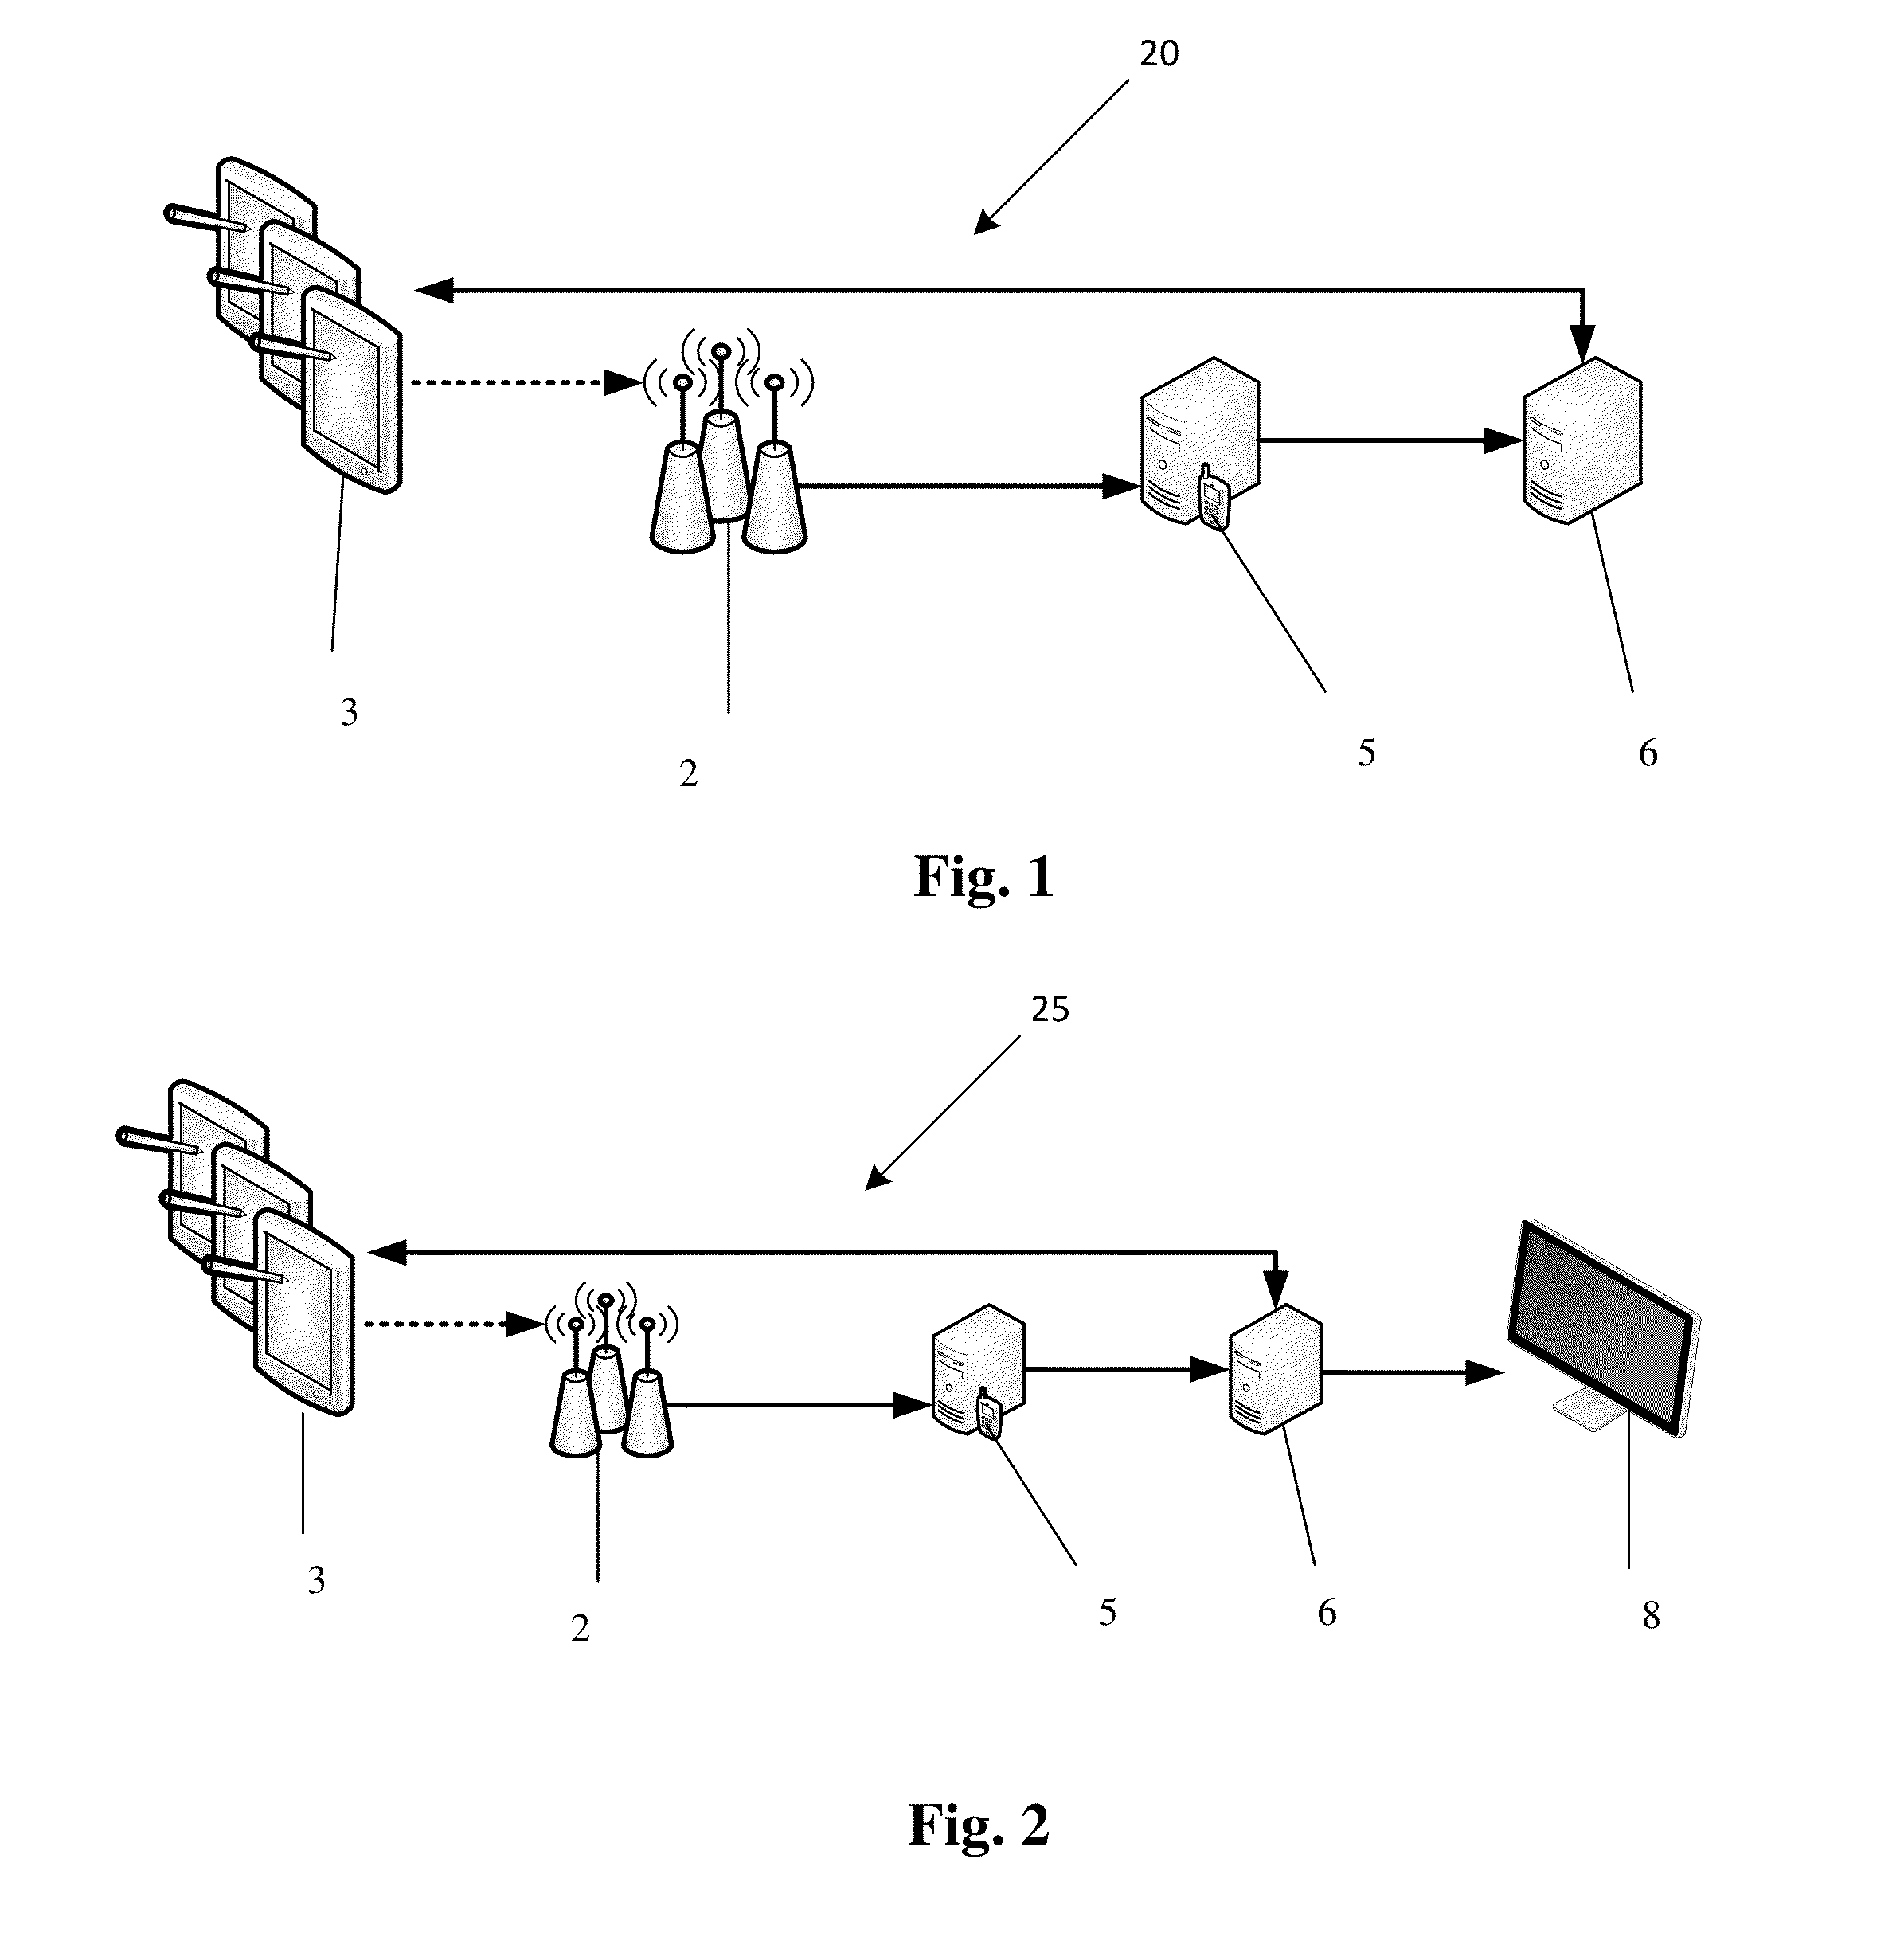 Method and system for using location services to teach concepts